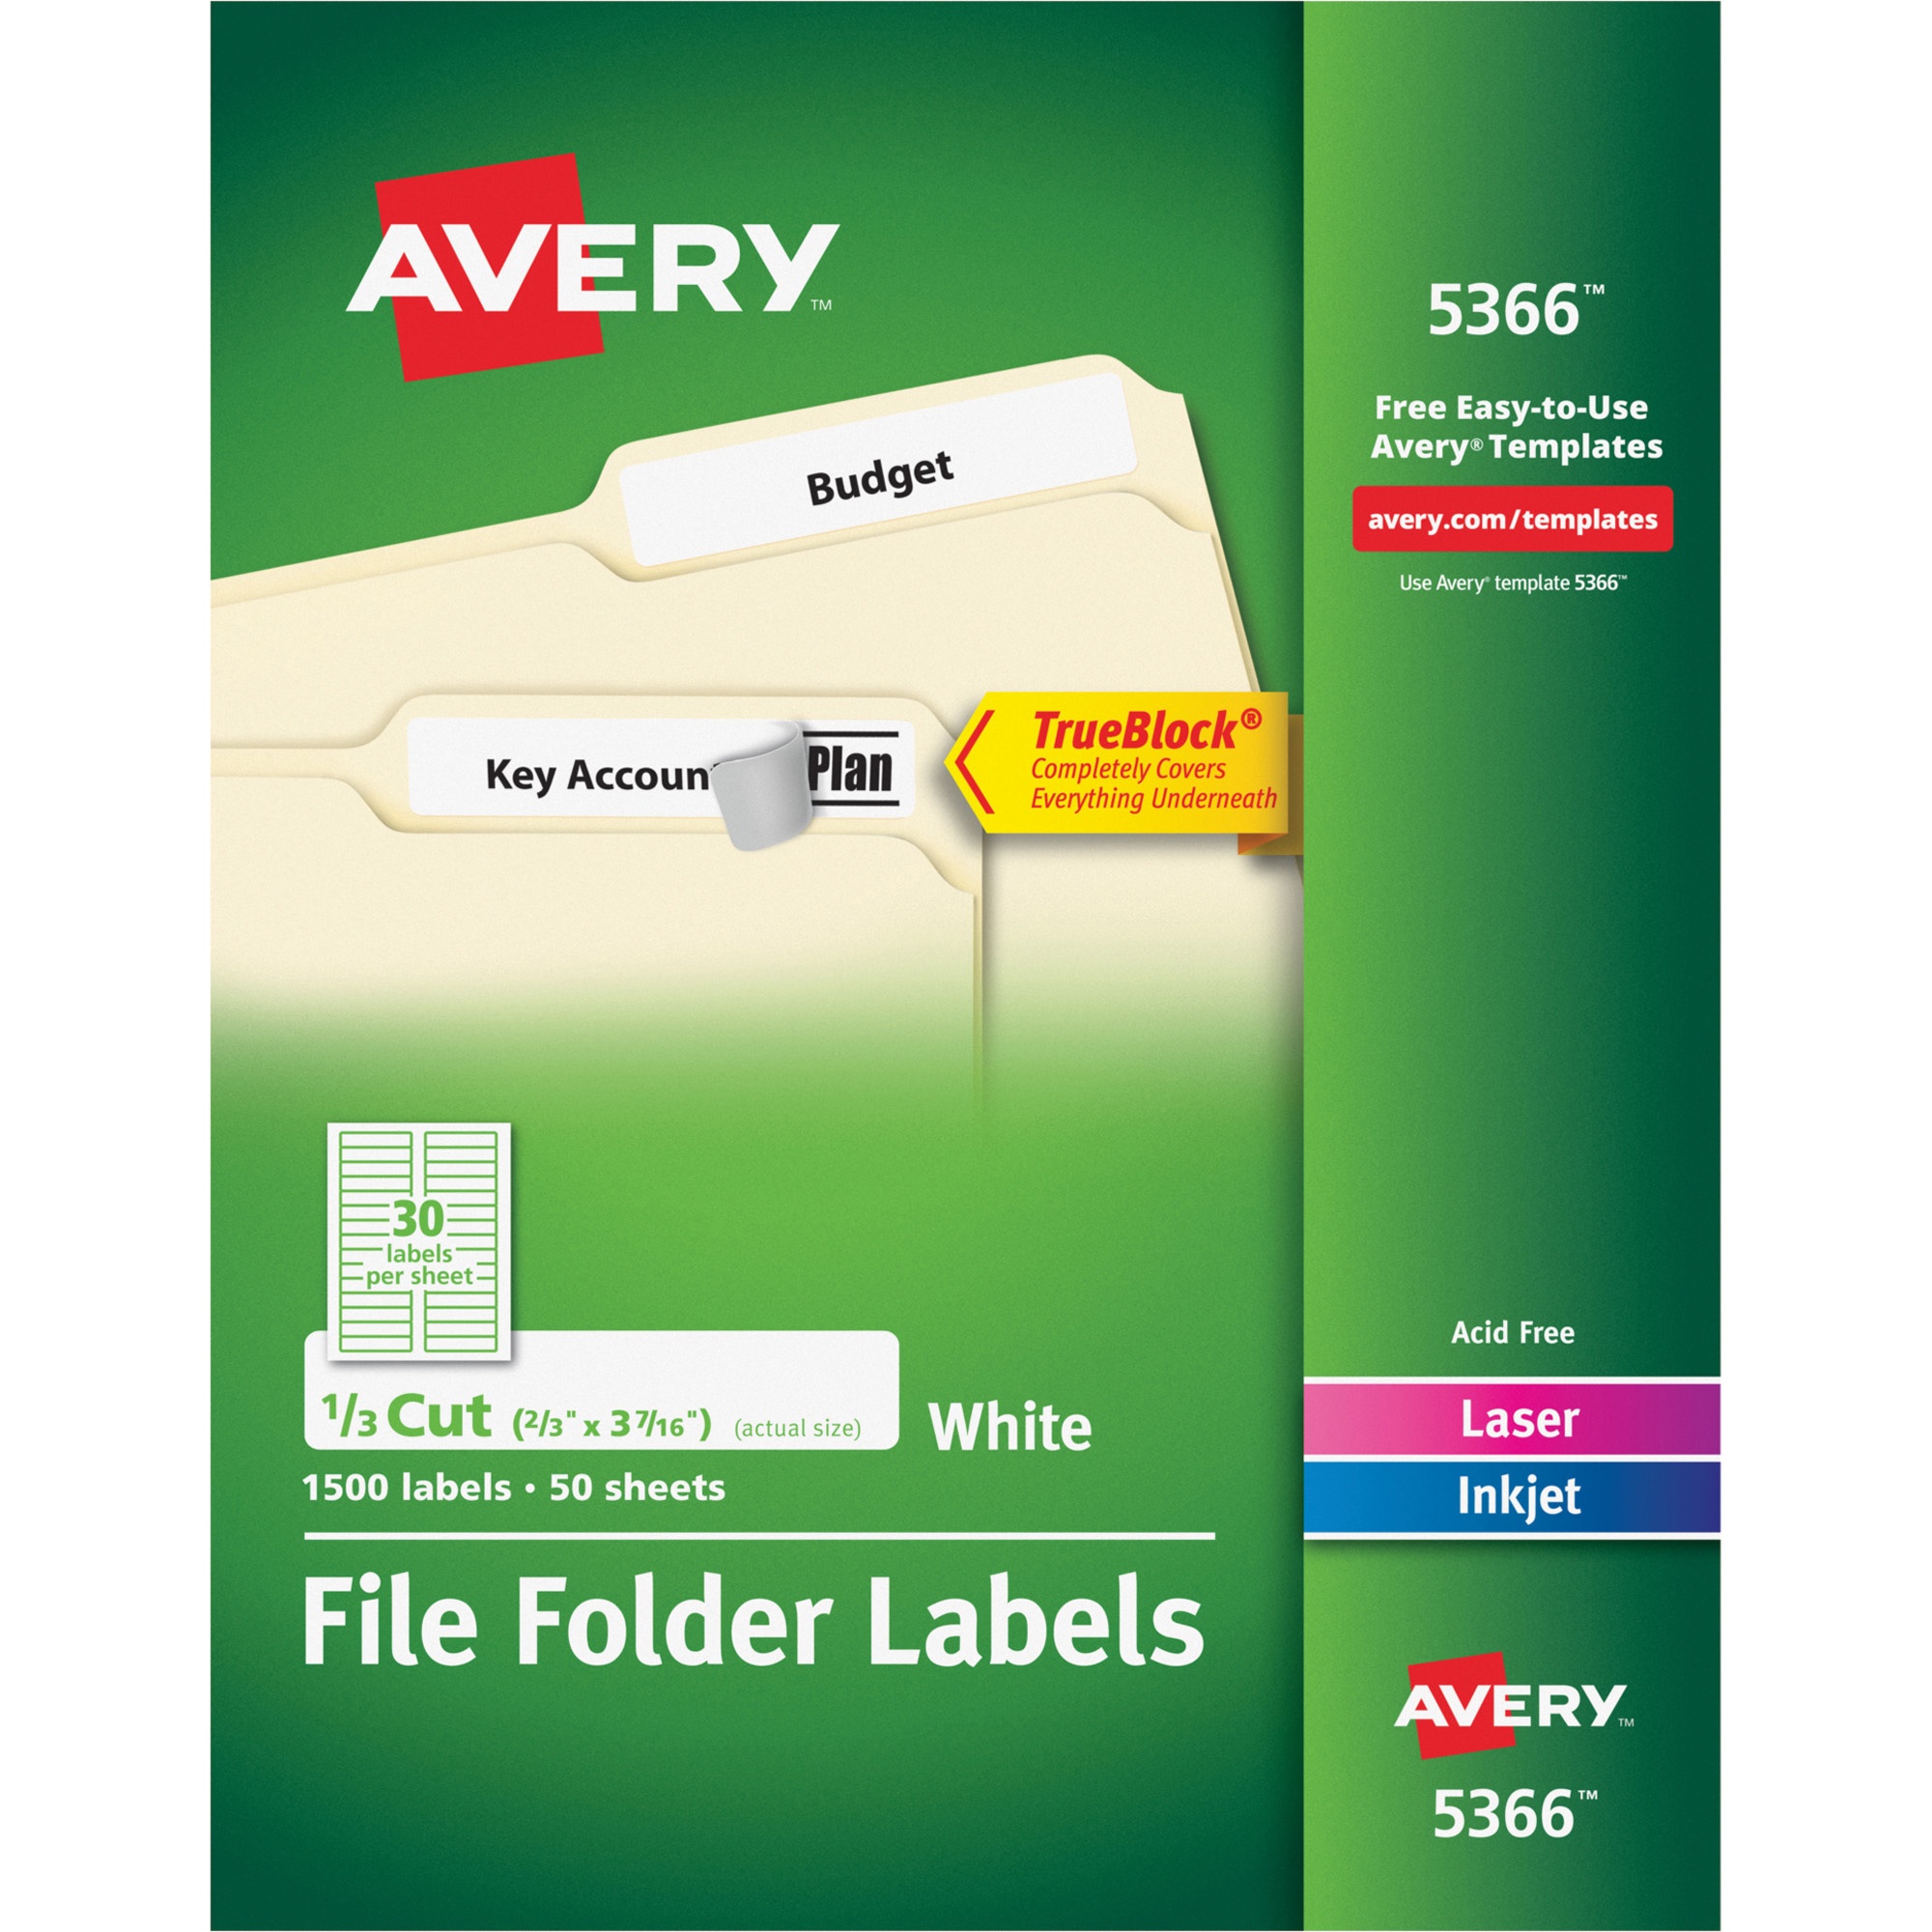 Avery 5366 Avery Filing Label Ave5366 Ave 5366 Office Supply Hut 